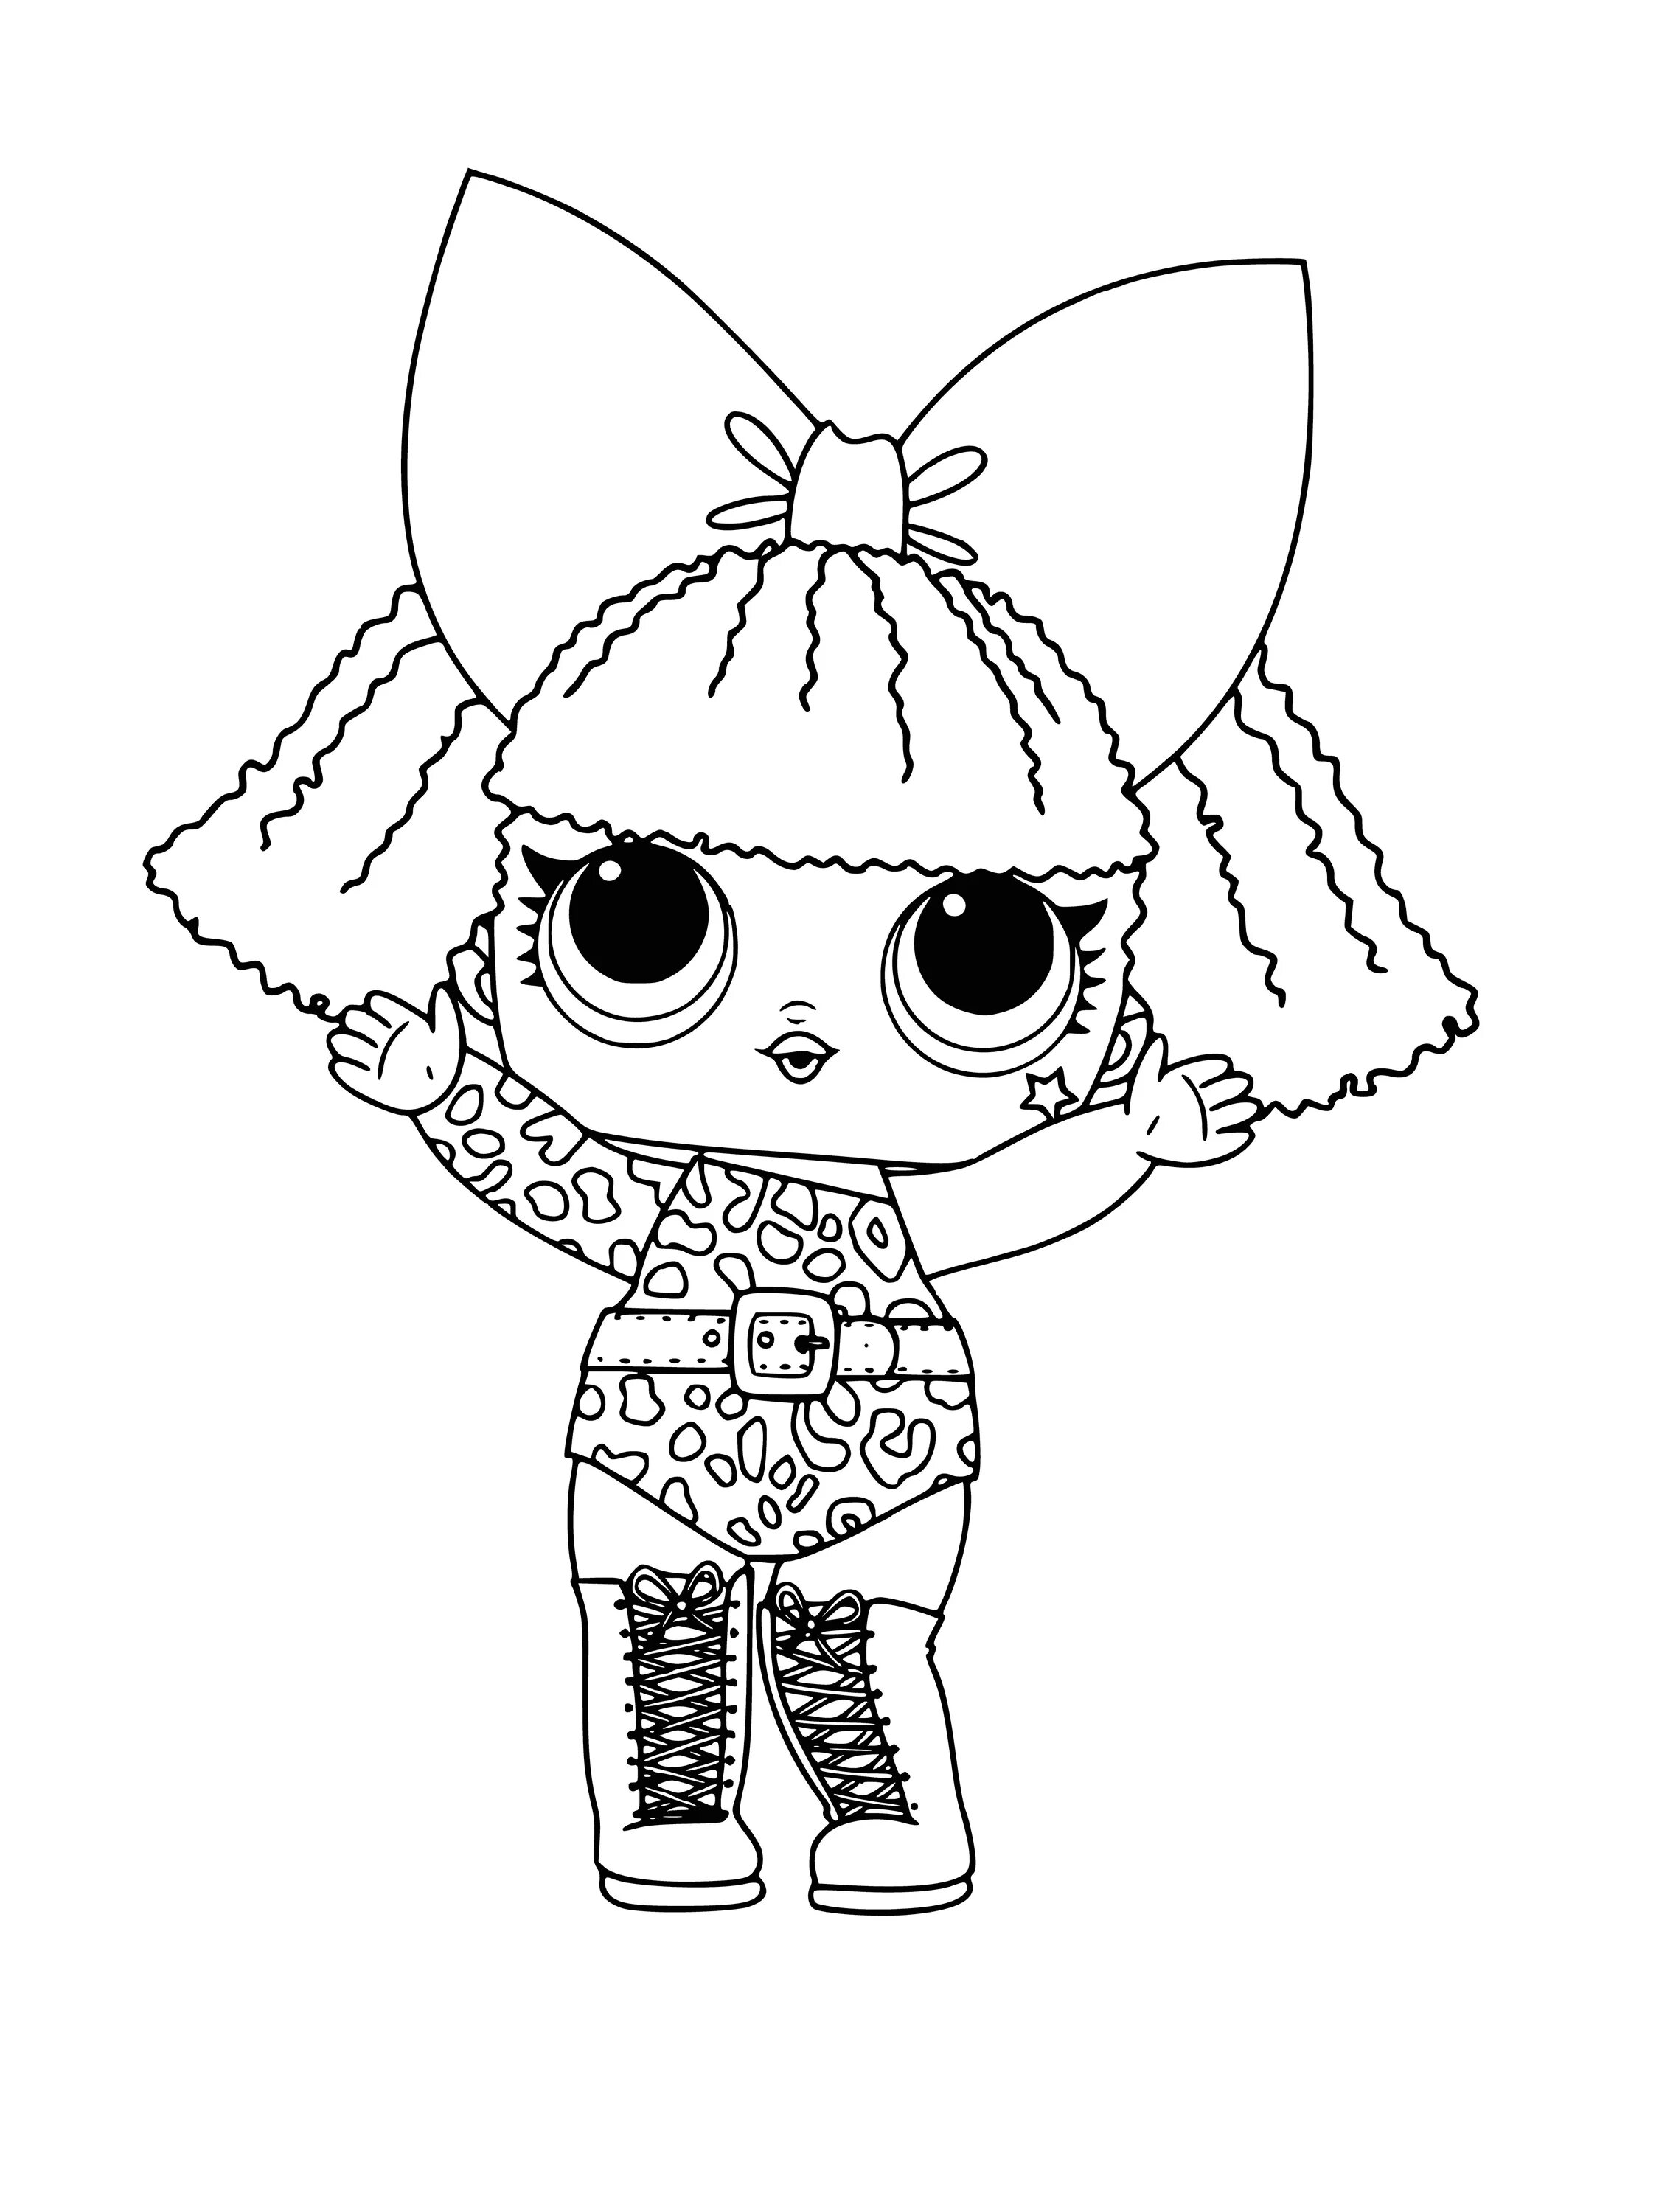 Cute coloring book for lol dolls